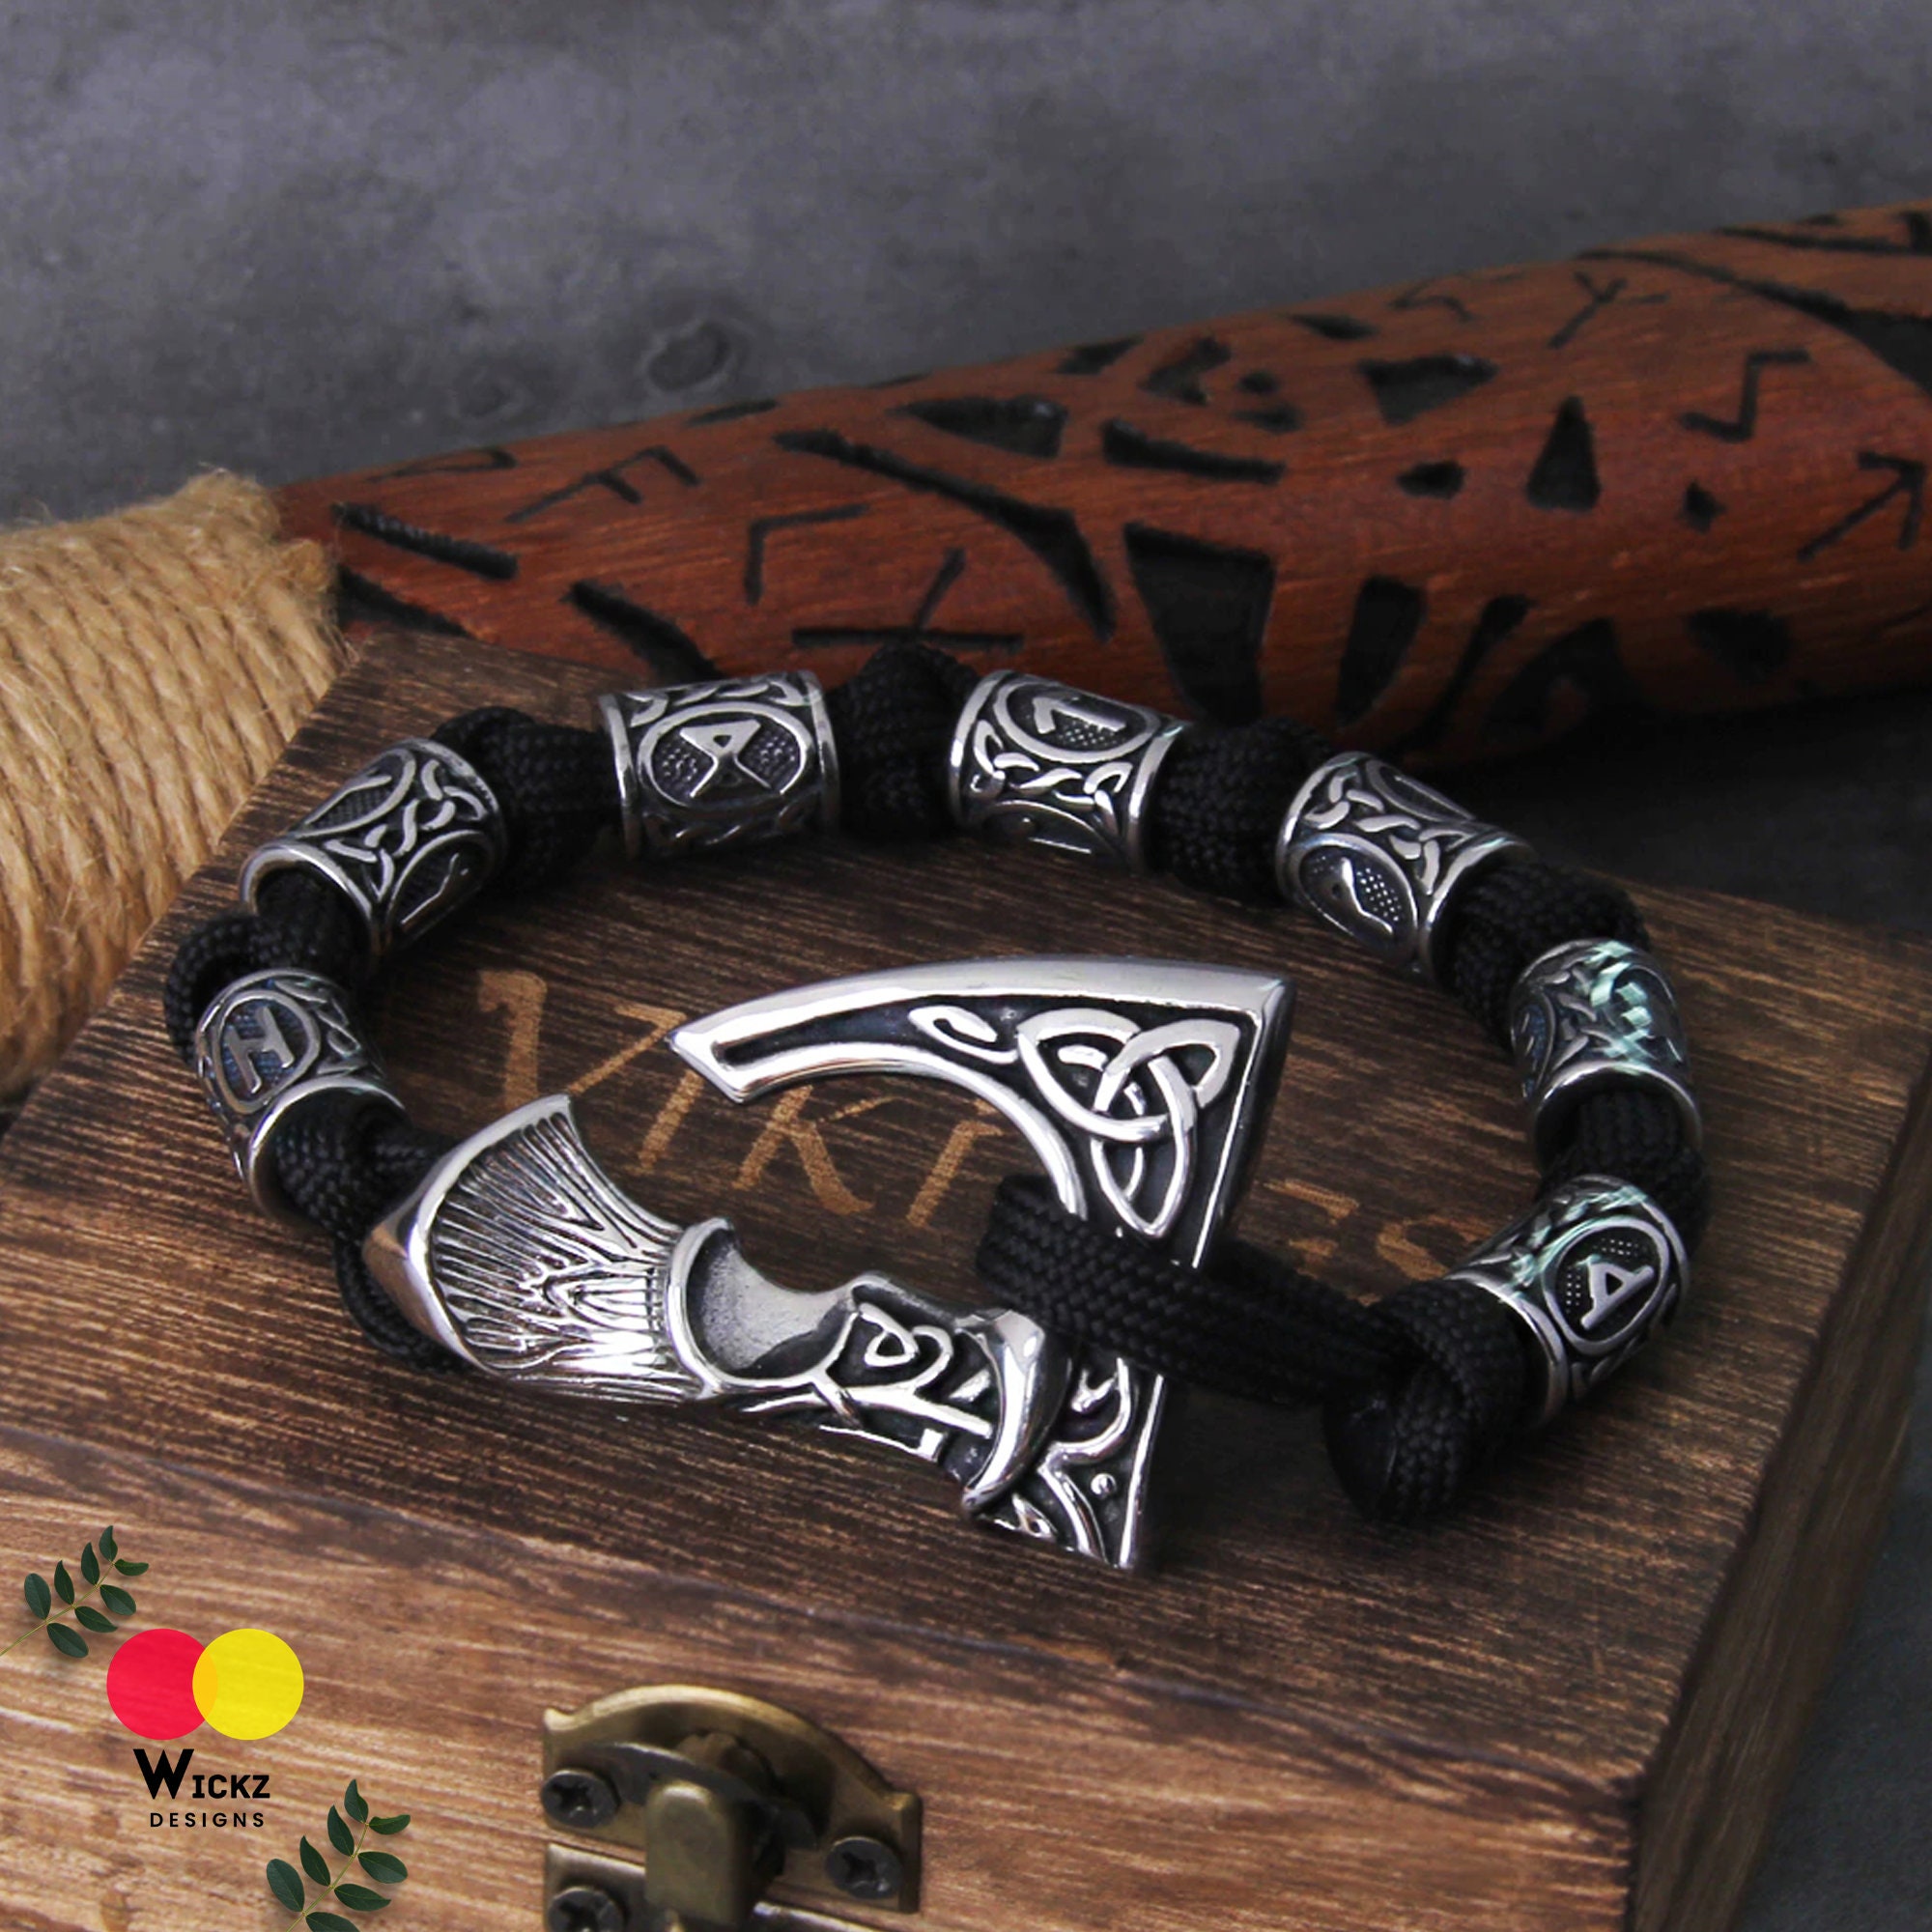 Paracord Scandinavian Bracelet With Runes and Ax Clasp, Bronze Claps,  Accessories Custom, Men's Accessory, Trendy Gift 